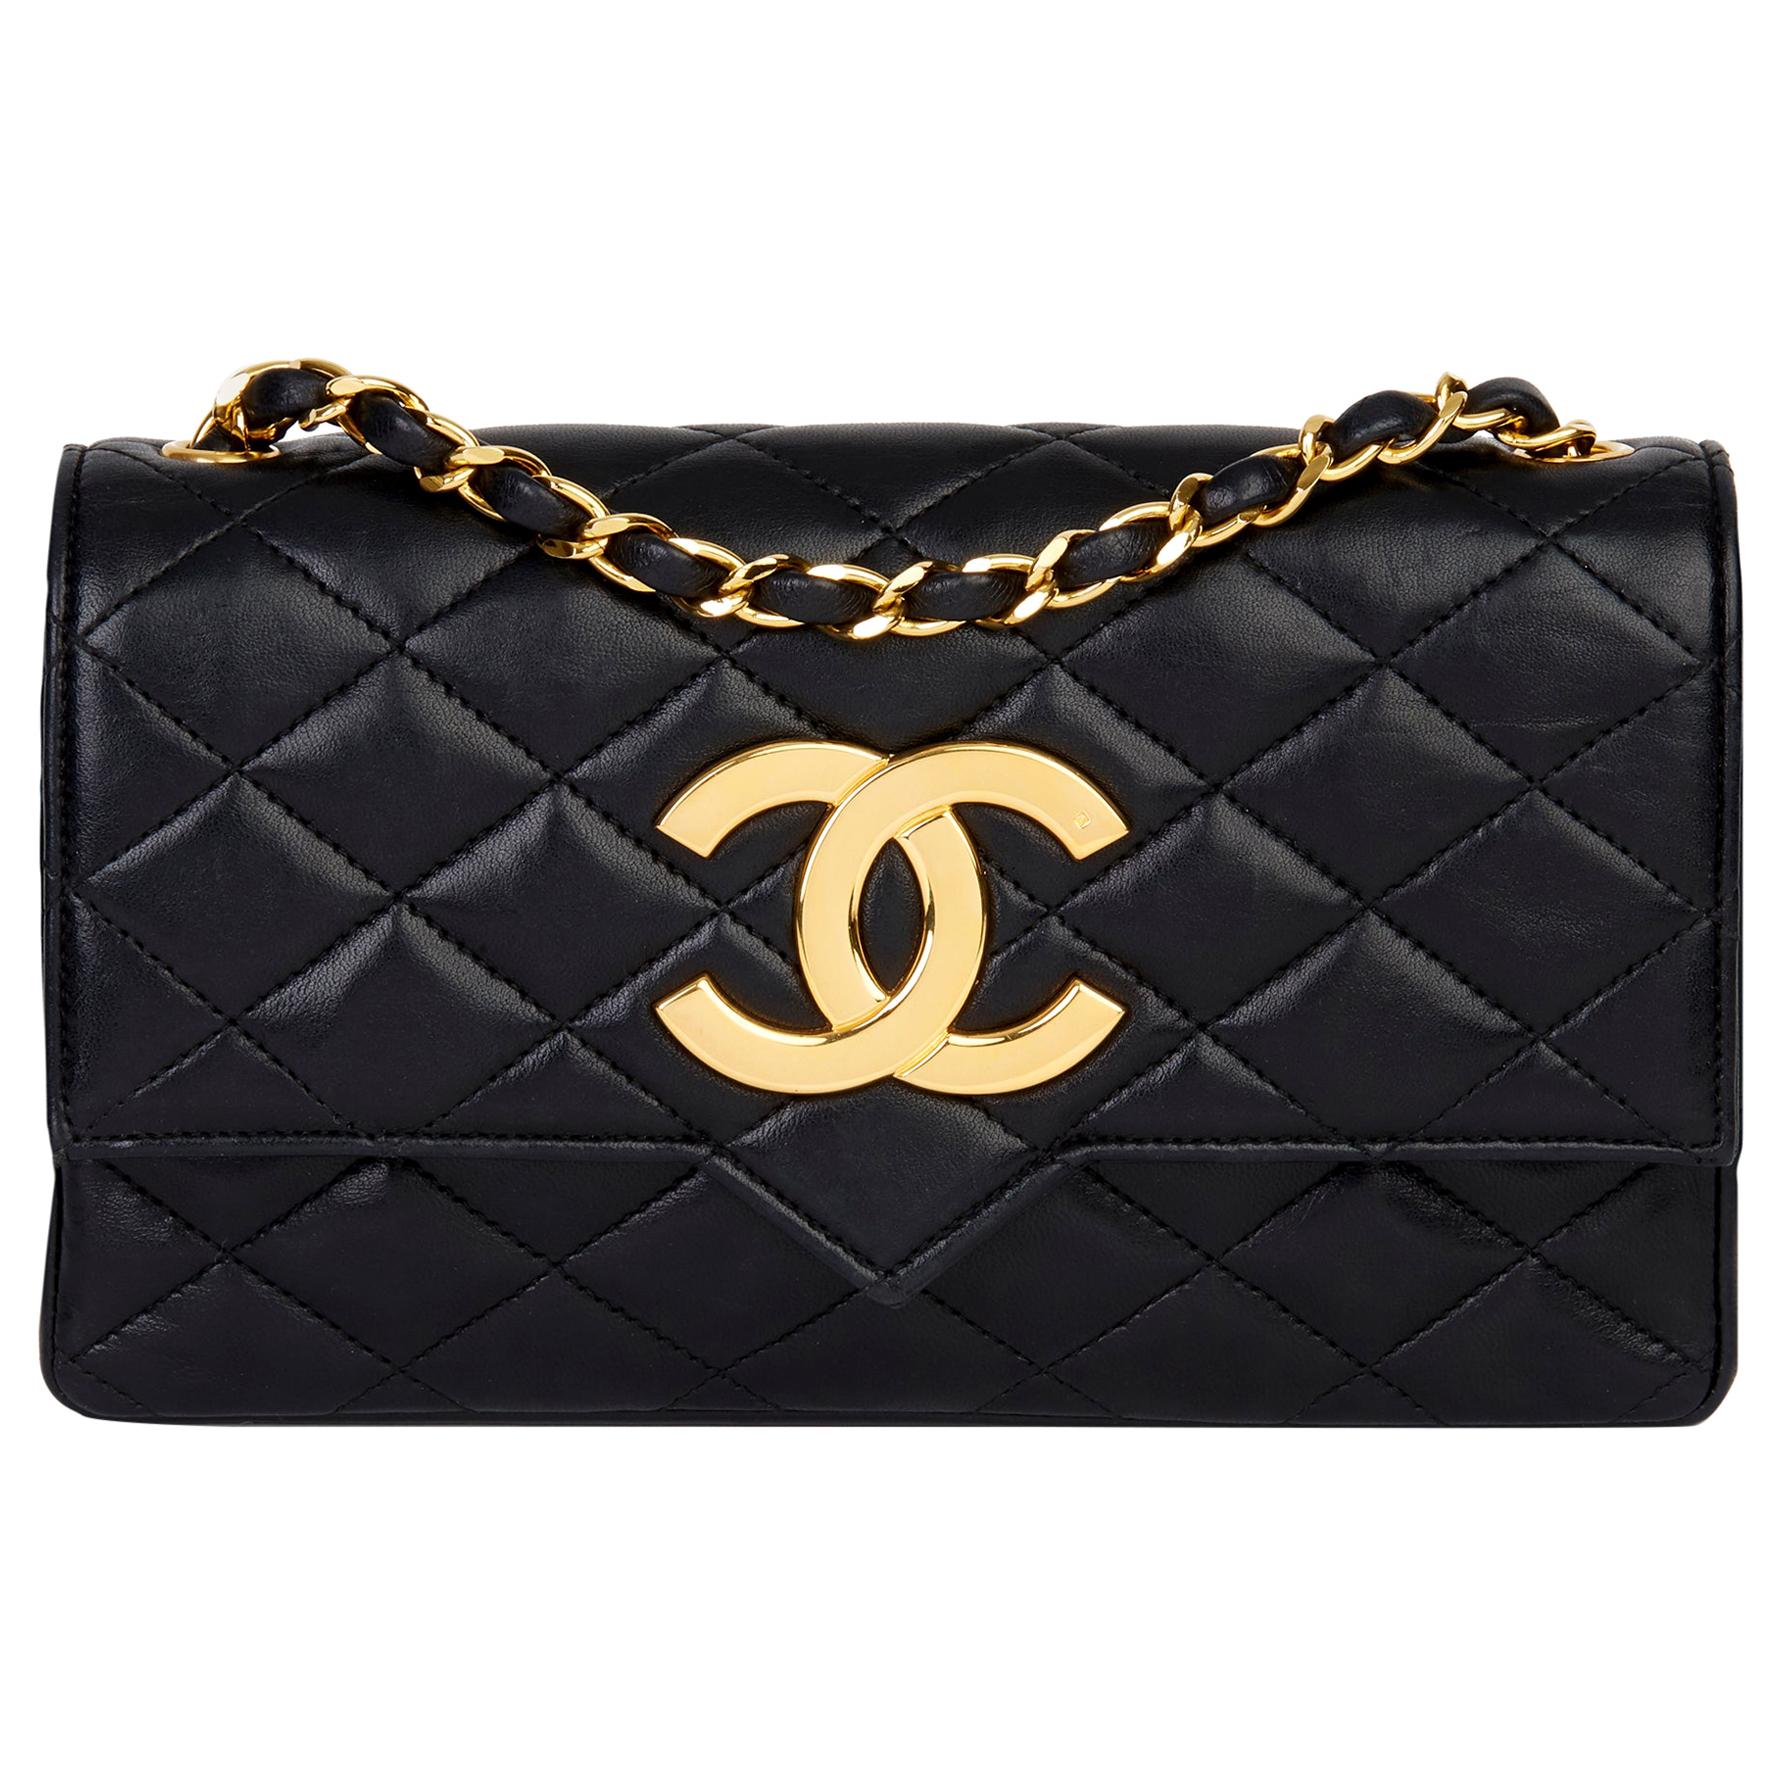 1988 Chanel Black Quilted Lambskin Vintage XL Classic Single Flap Bag 